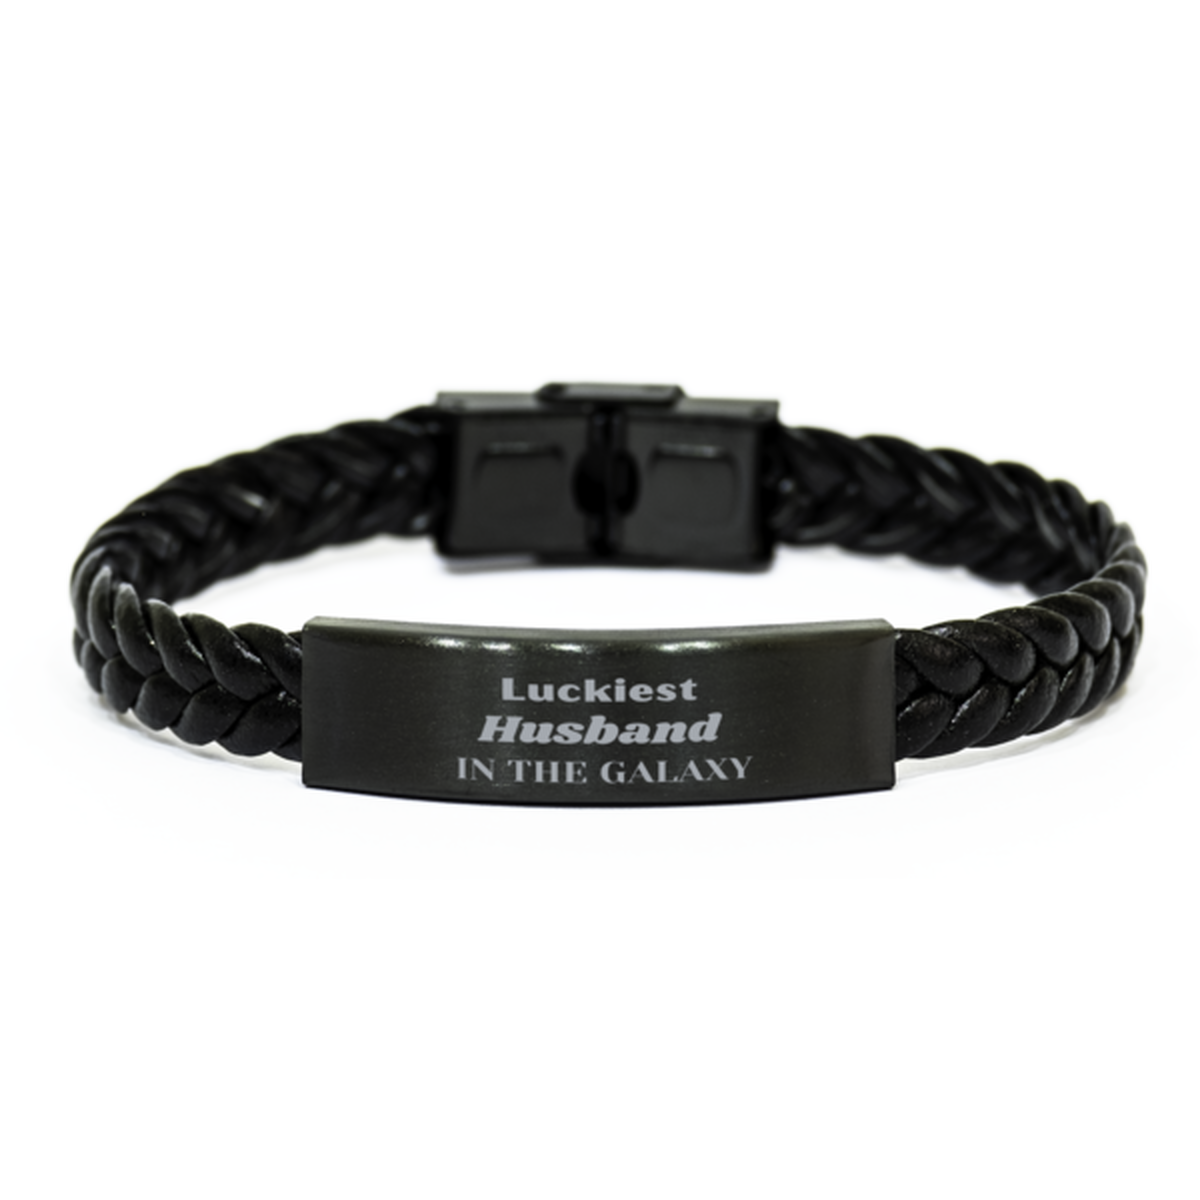 Luckiest Husband in the Galaxy, To My Husband Engraved Gifts, Christmas Husband Braided Leather Bracelet Gifts, X-mas Birthday Unique Gifts For Husband Men Women